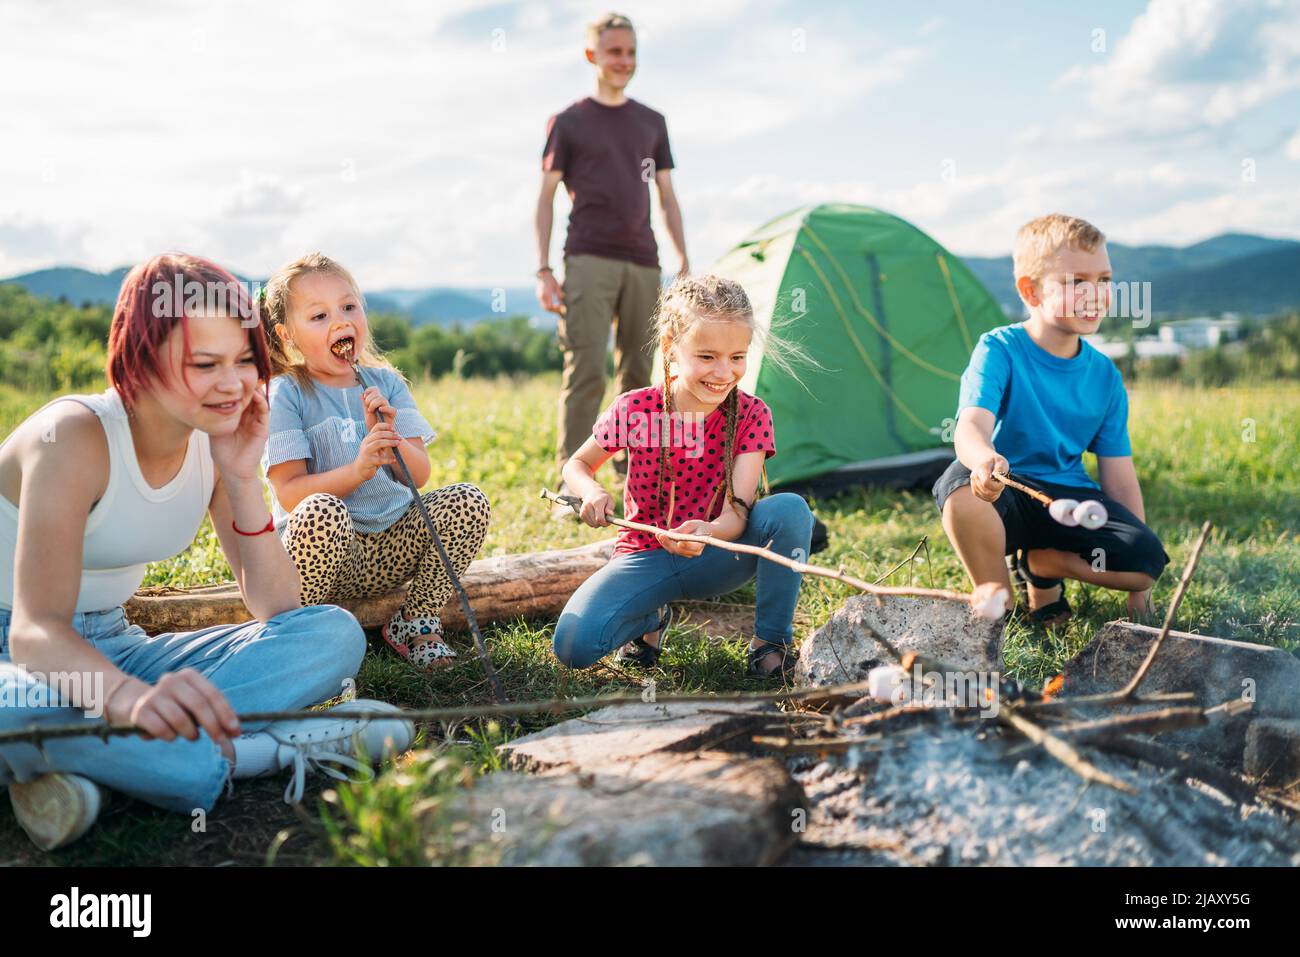 Boys and girls friends kids cheerfully laughing and roasting marshmallows on sticks over campfire flame near the green tent. Outdoor active time spend Stock Photo